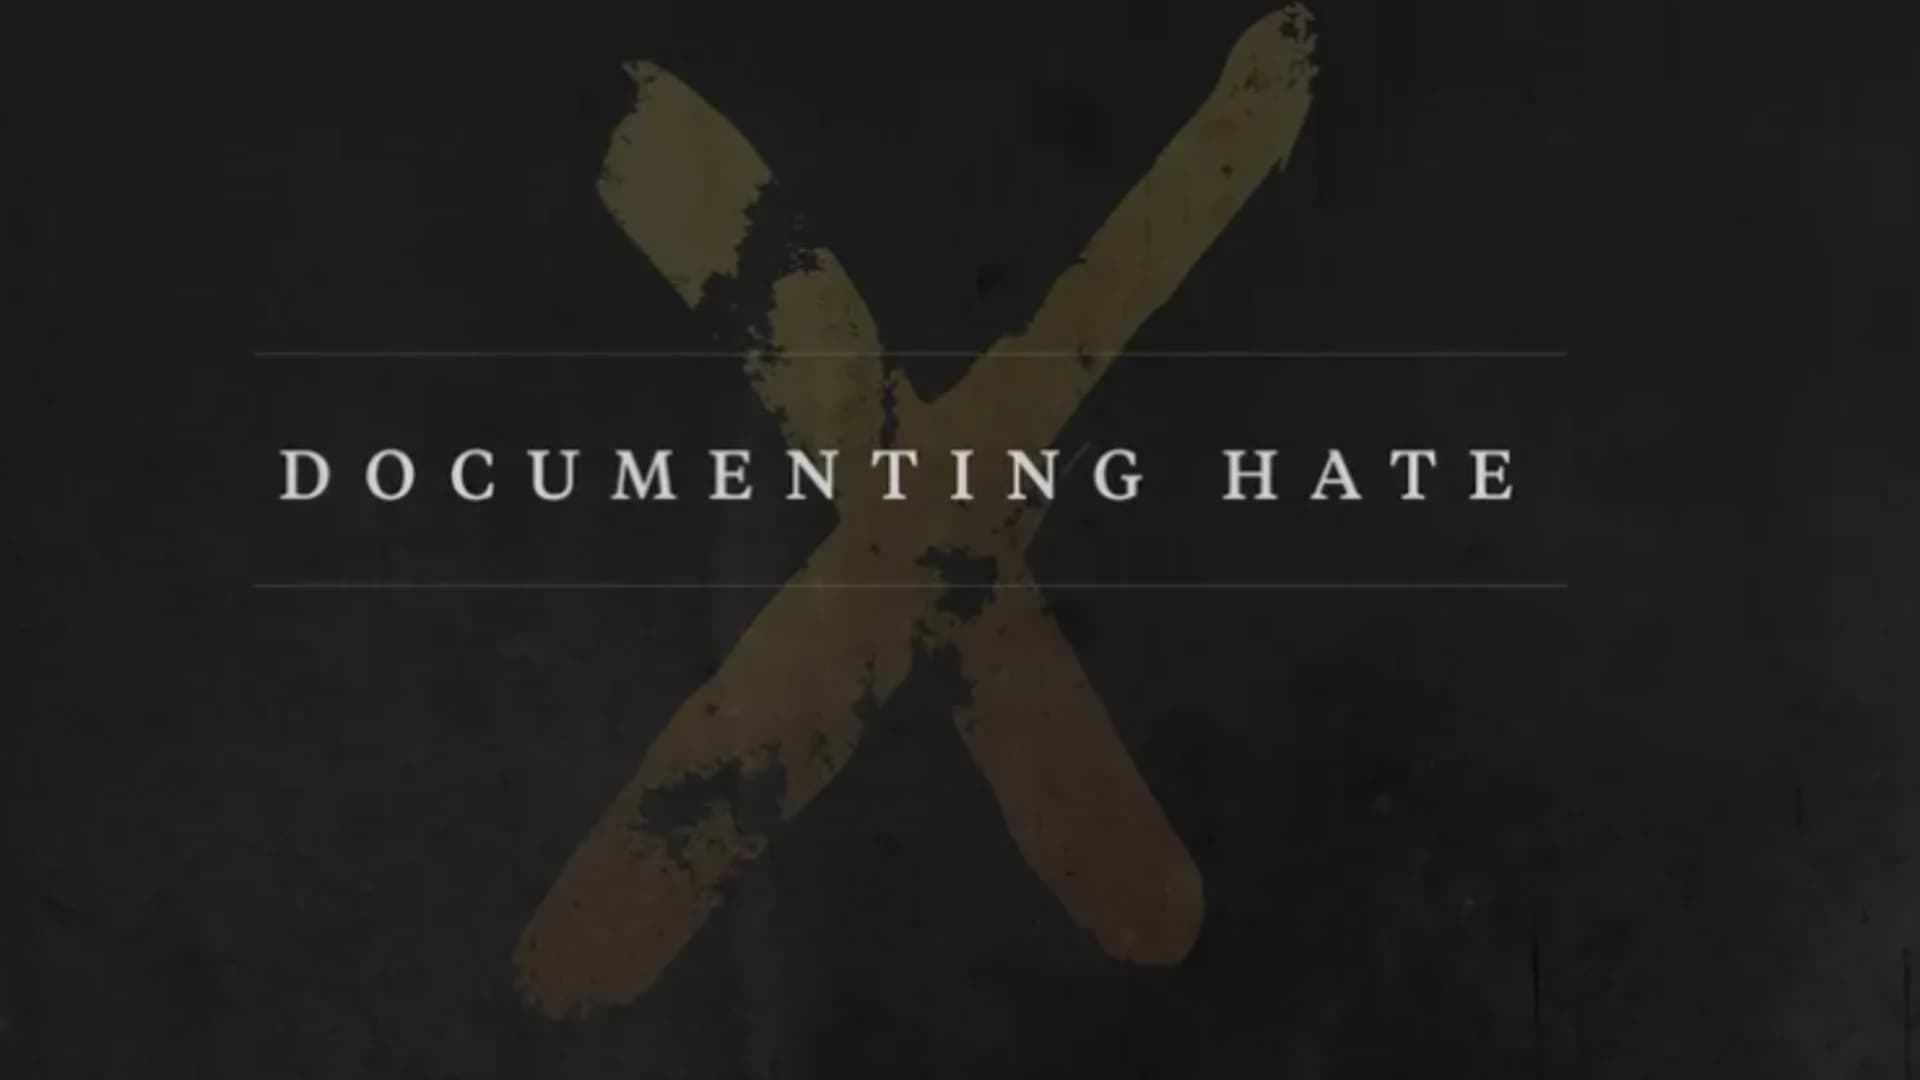 News 12 Long Island partners with Documenting Hate to report on hate crimes